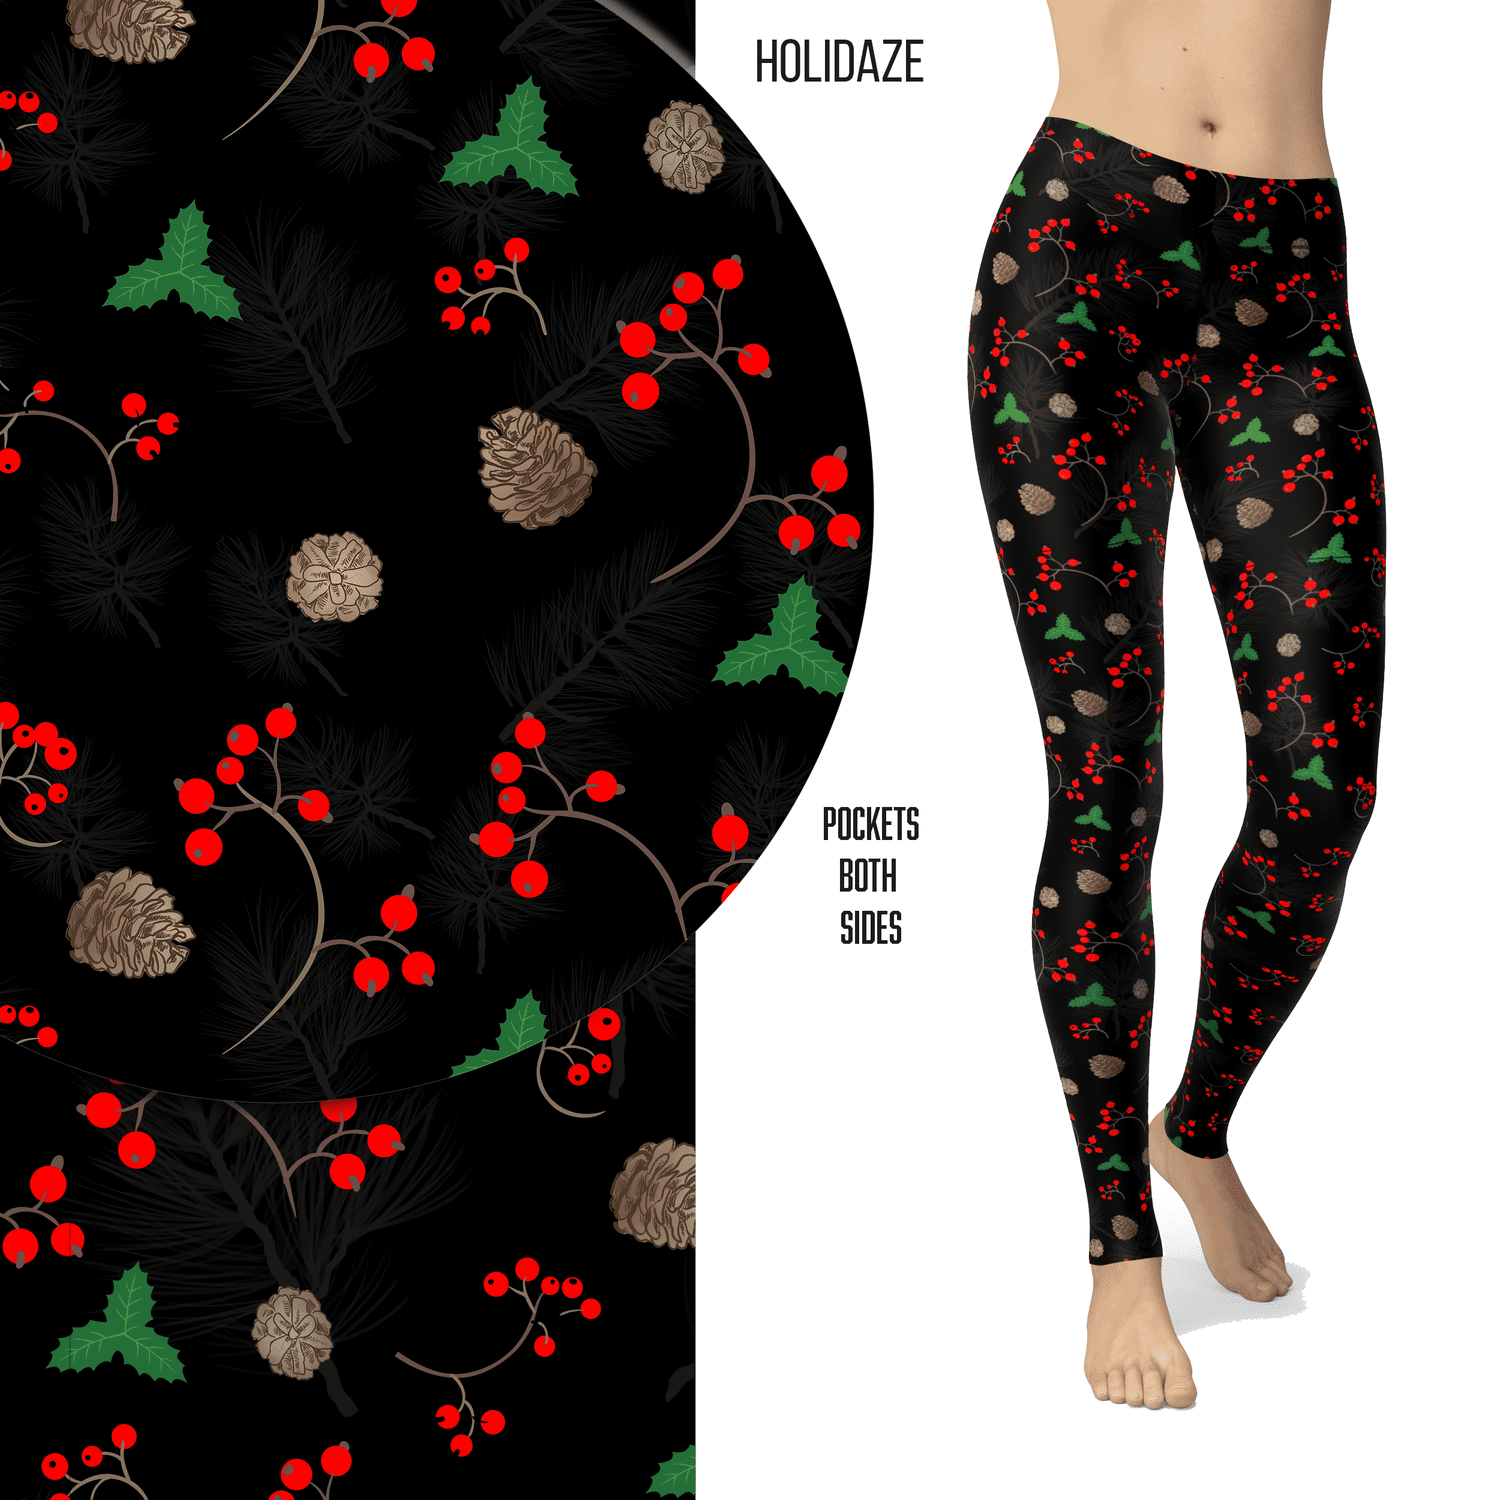 Holidaze Holly Berry Leggings with Pocket